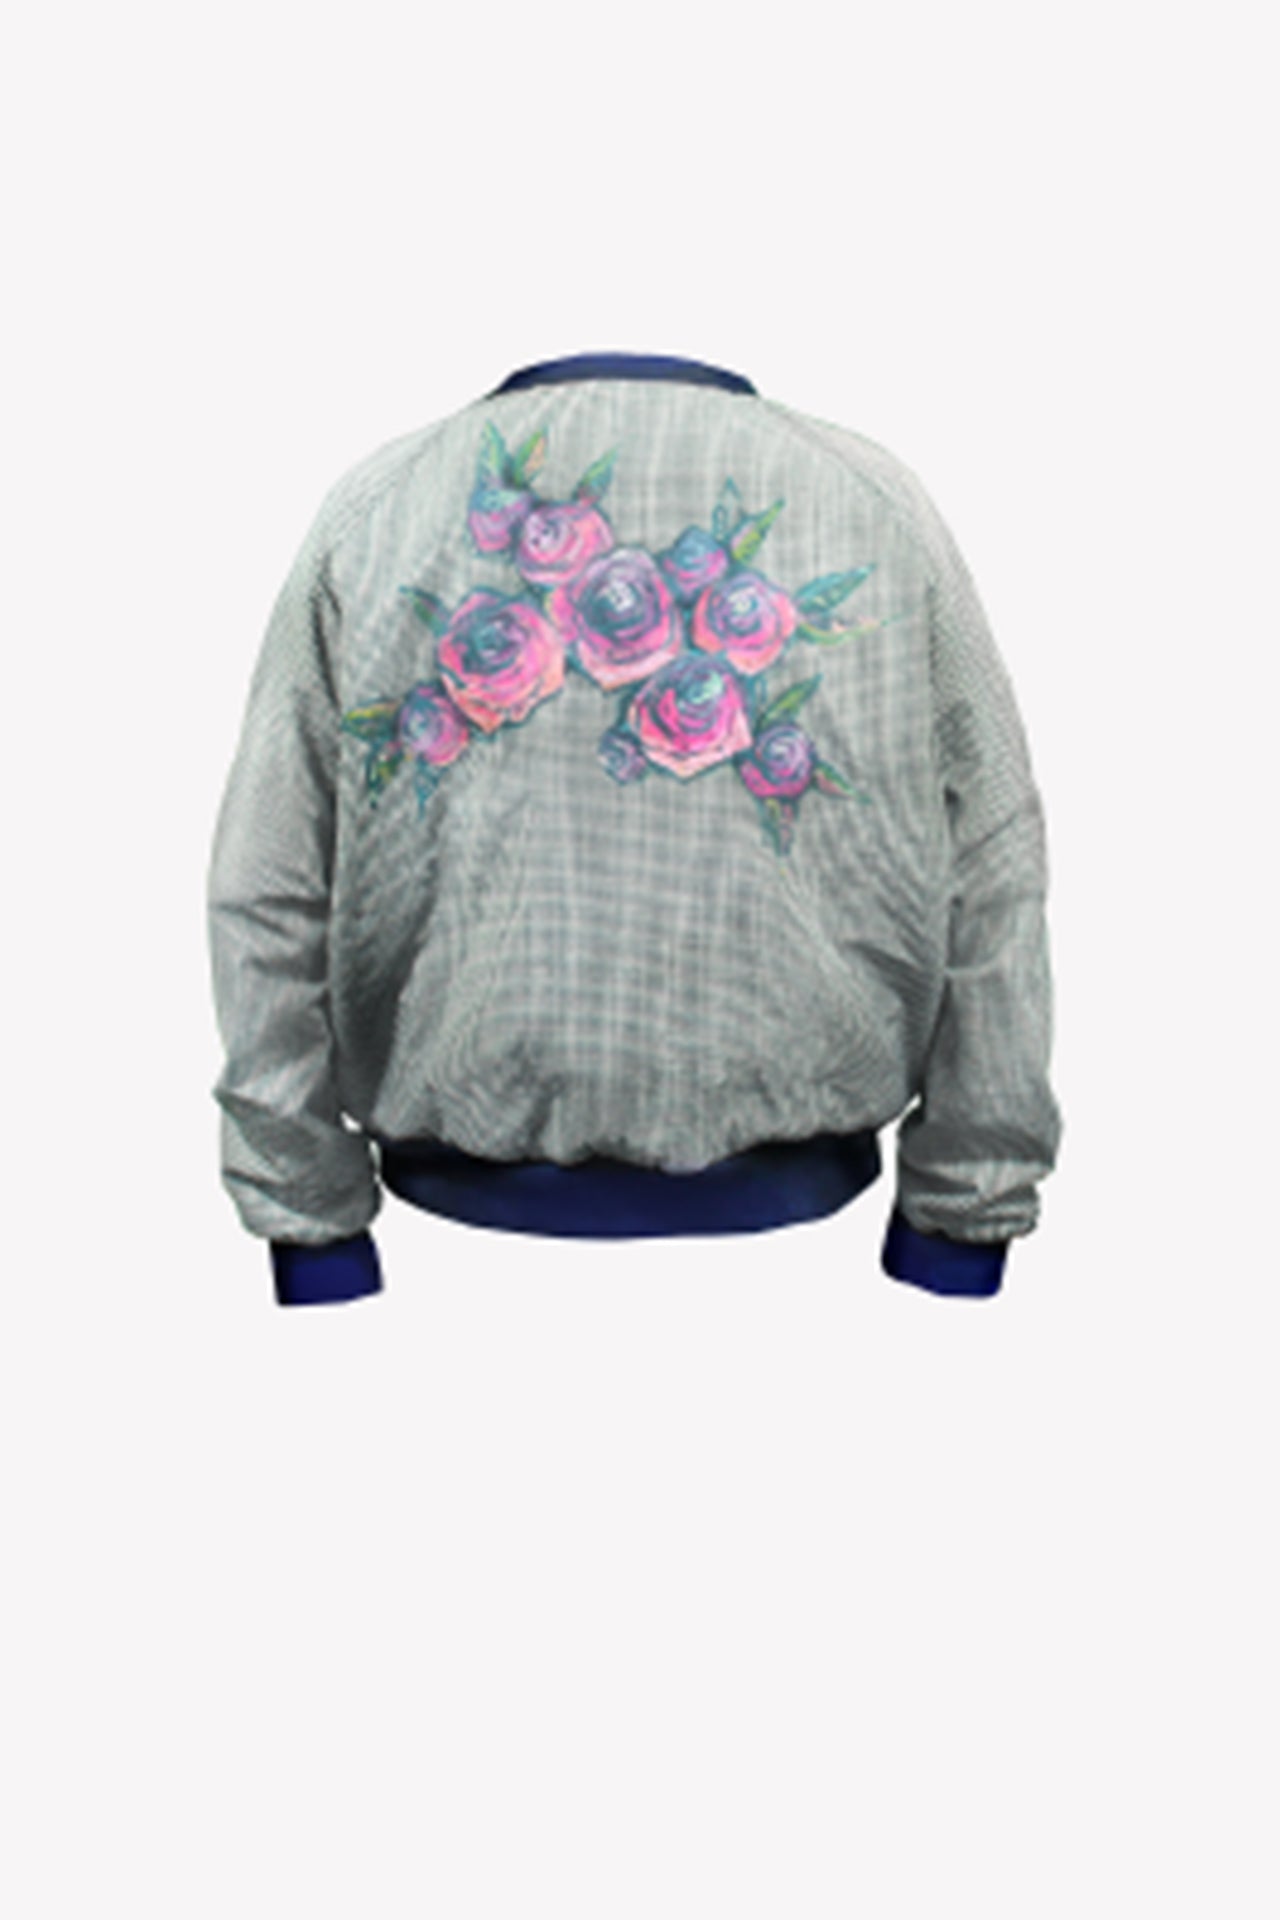 Hand painted gingham bomber jacket in navy